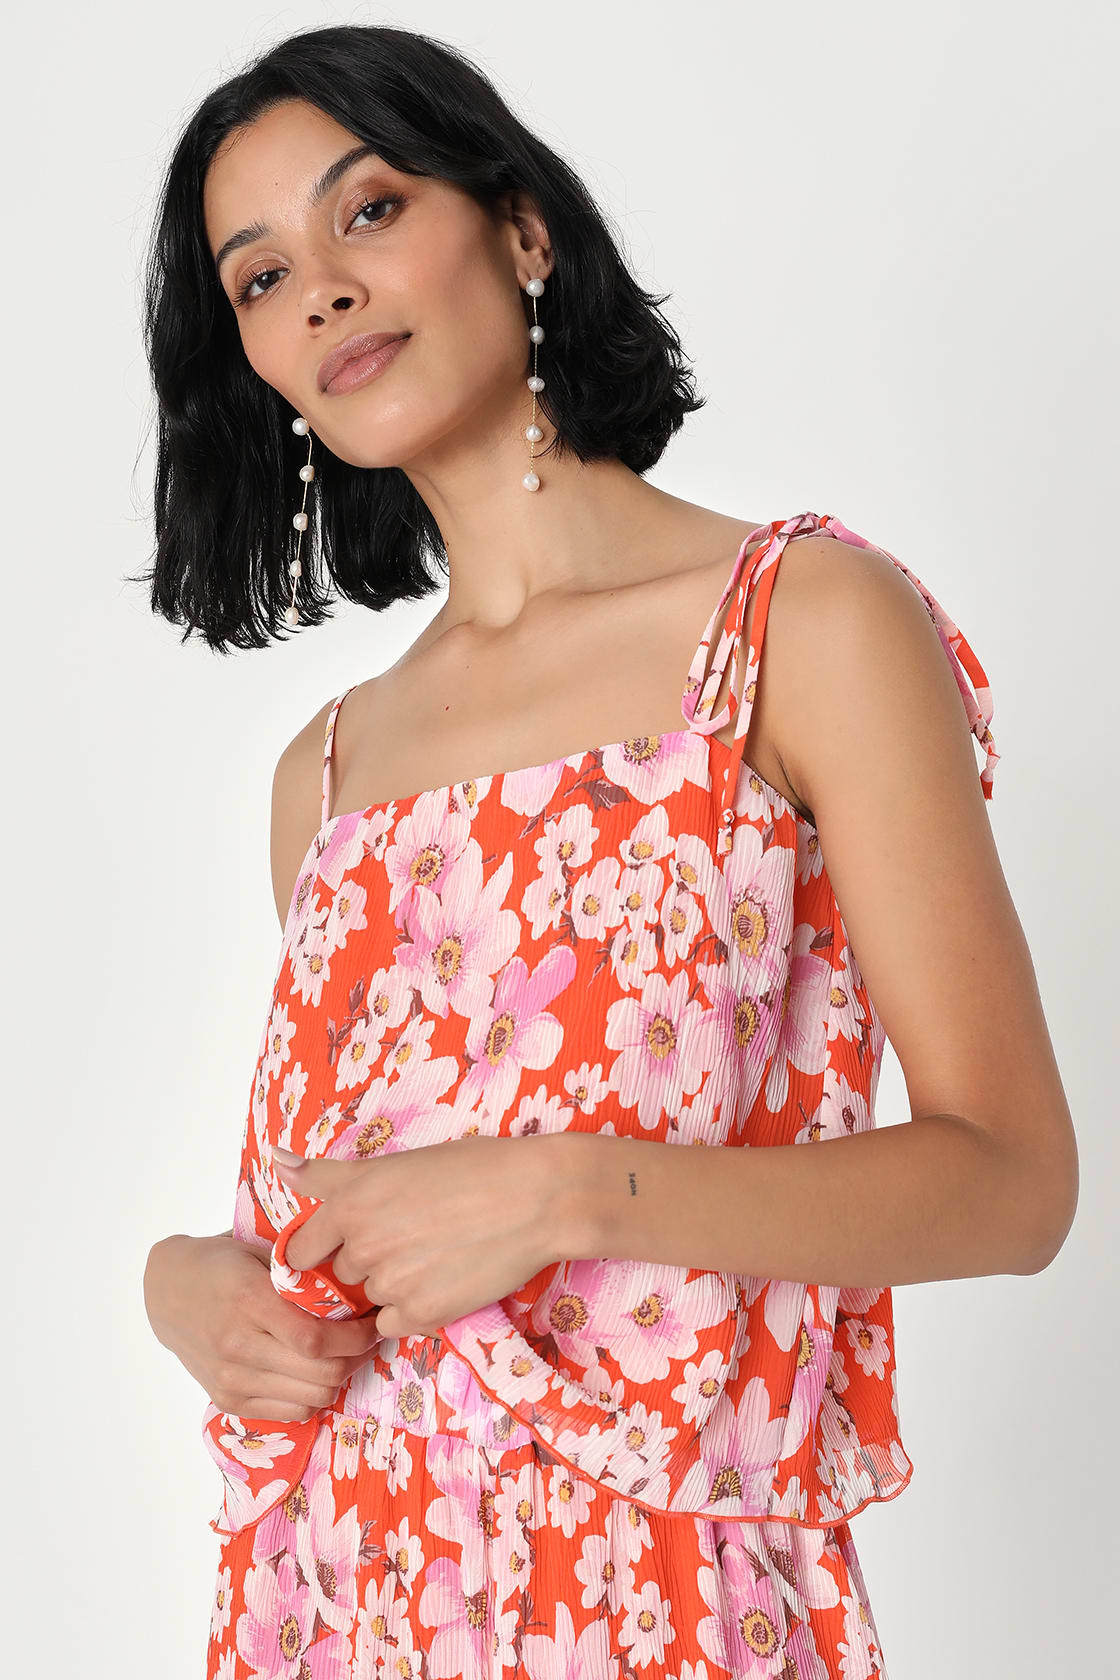 TRENDY SUMMER TOPS TO SHOP RIGHT AWAY – The Loom Blog